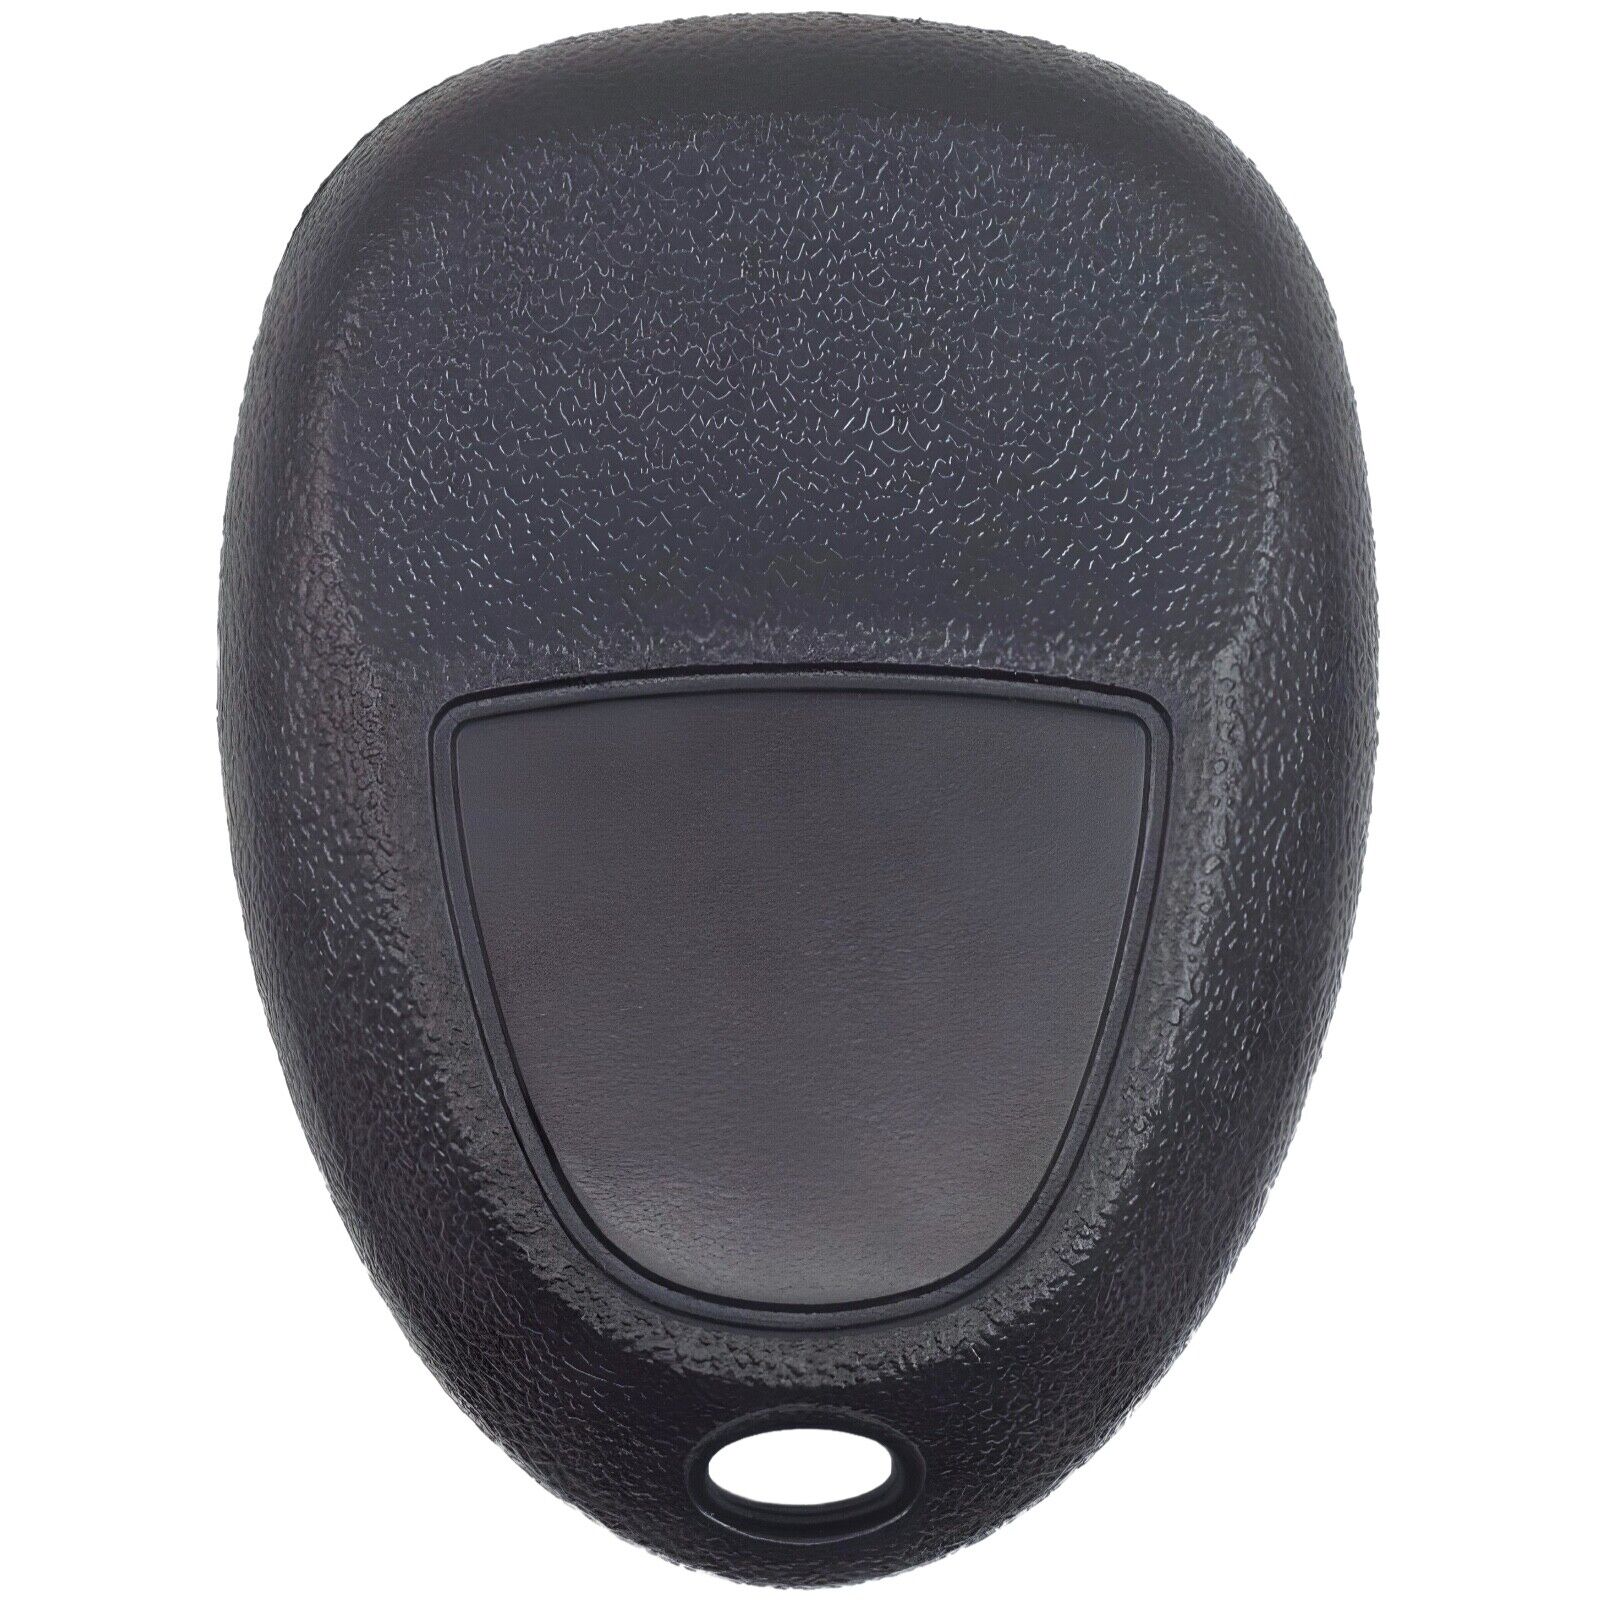 Key Fob Replacement For 2005-2008 Chevrolet Uplander FCC ID: KOBGT04A